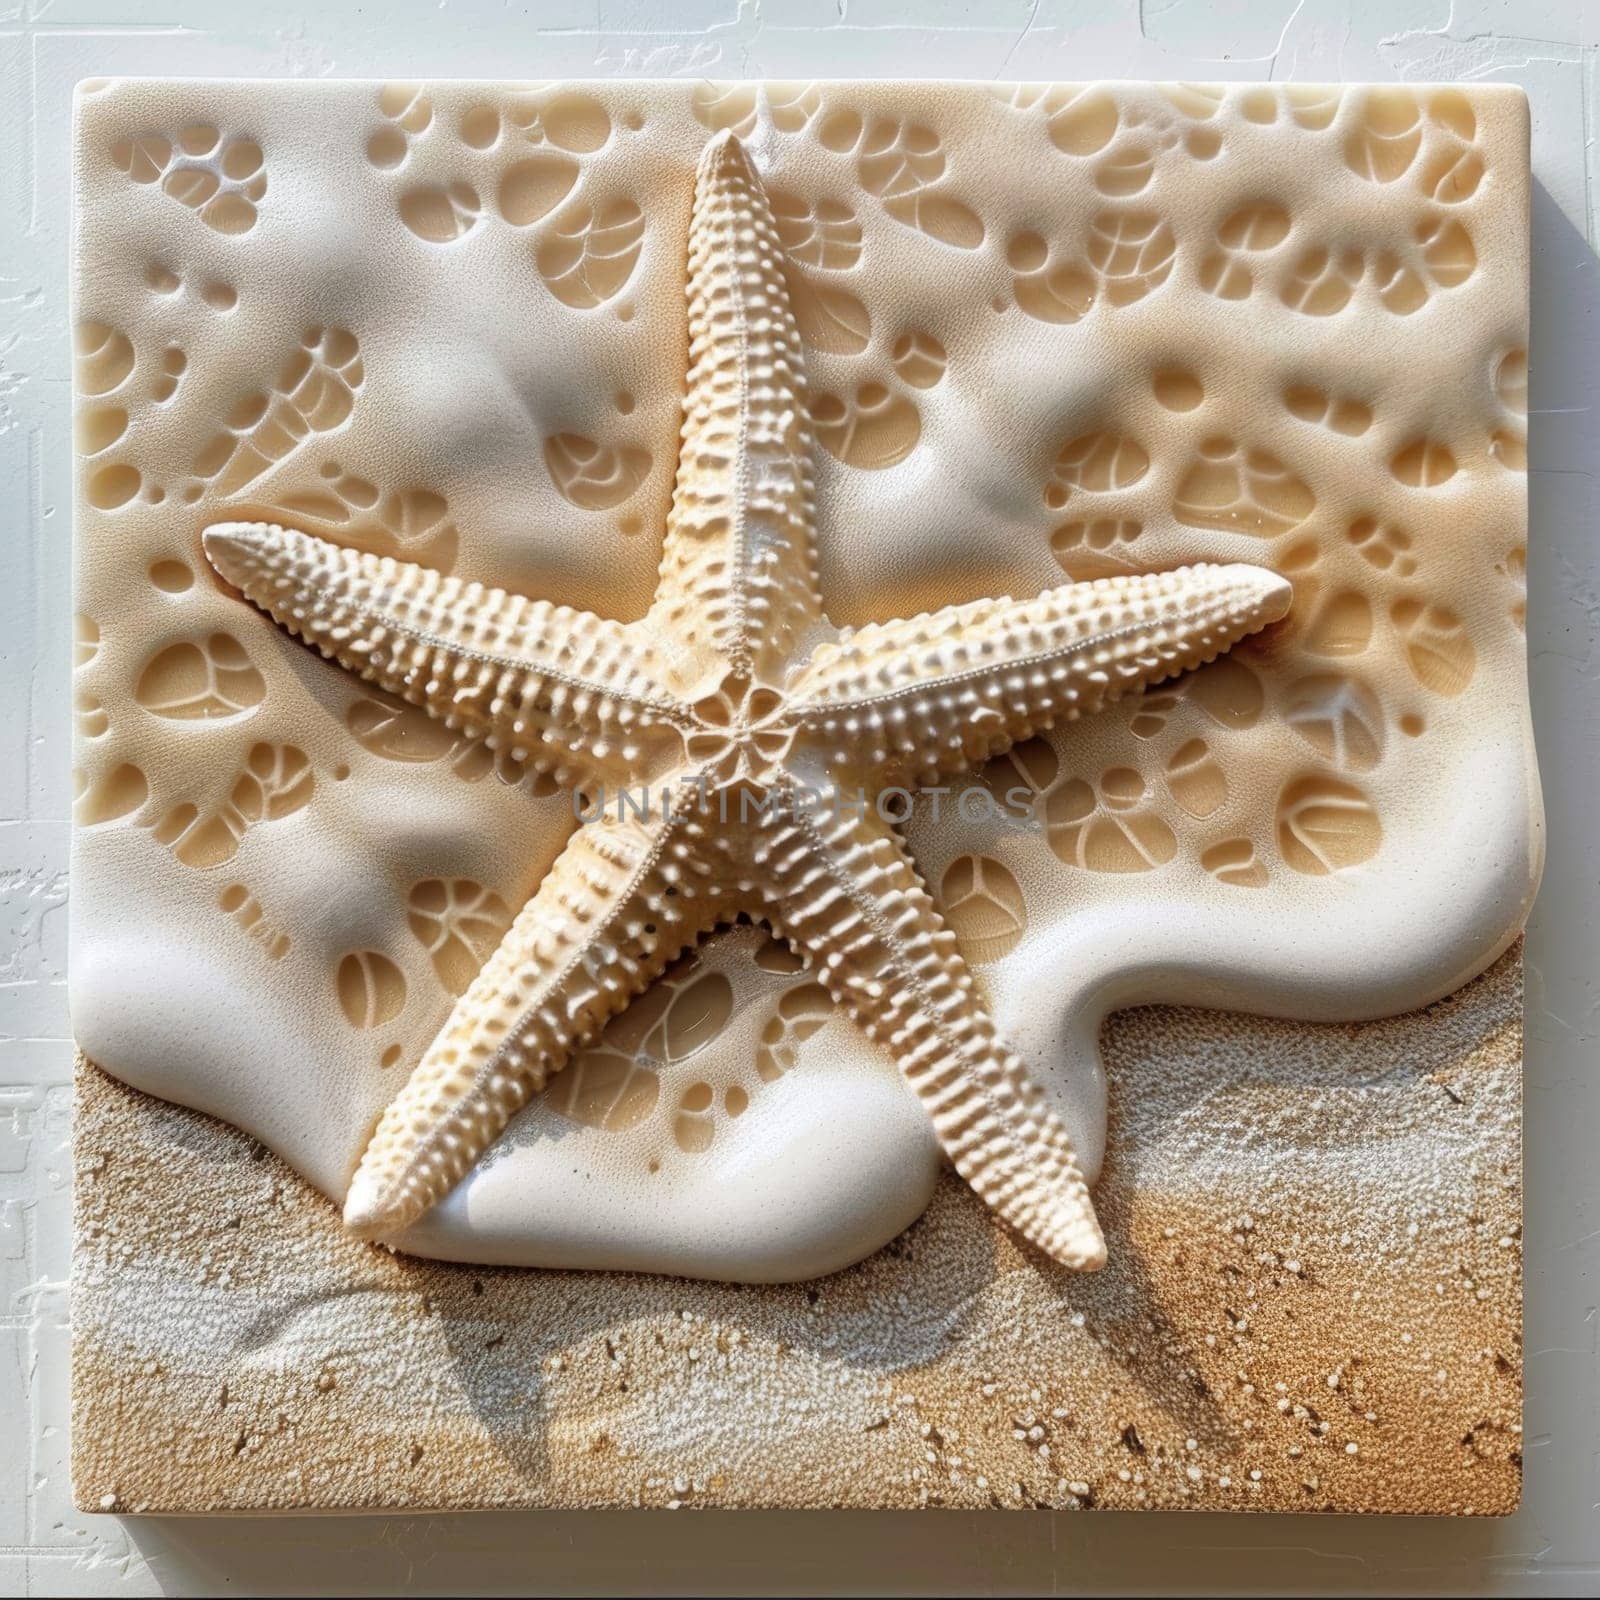 The starfish are lying on the sand. View from above. The concept of a summer sea or beach.